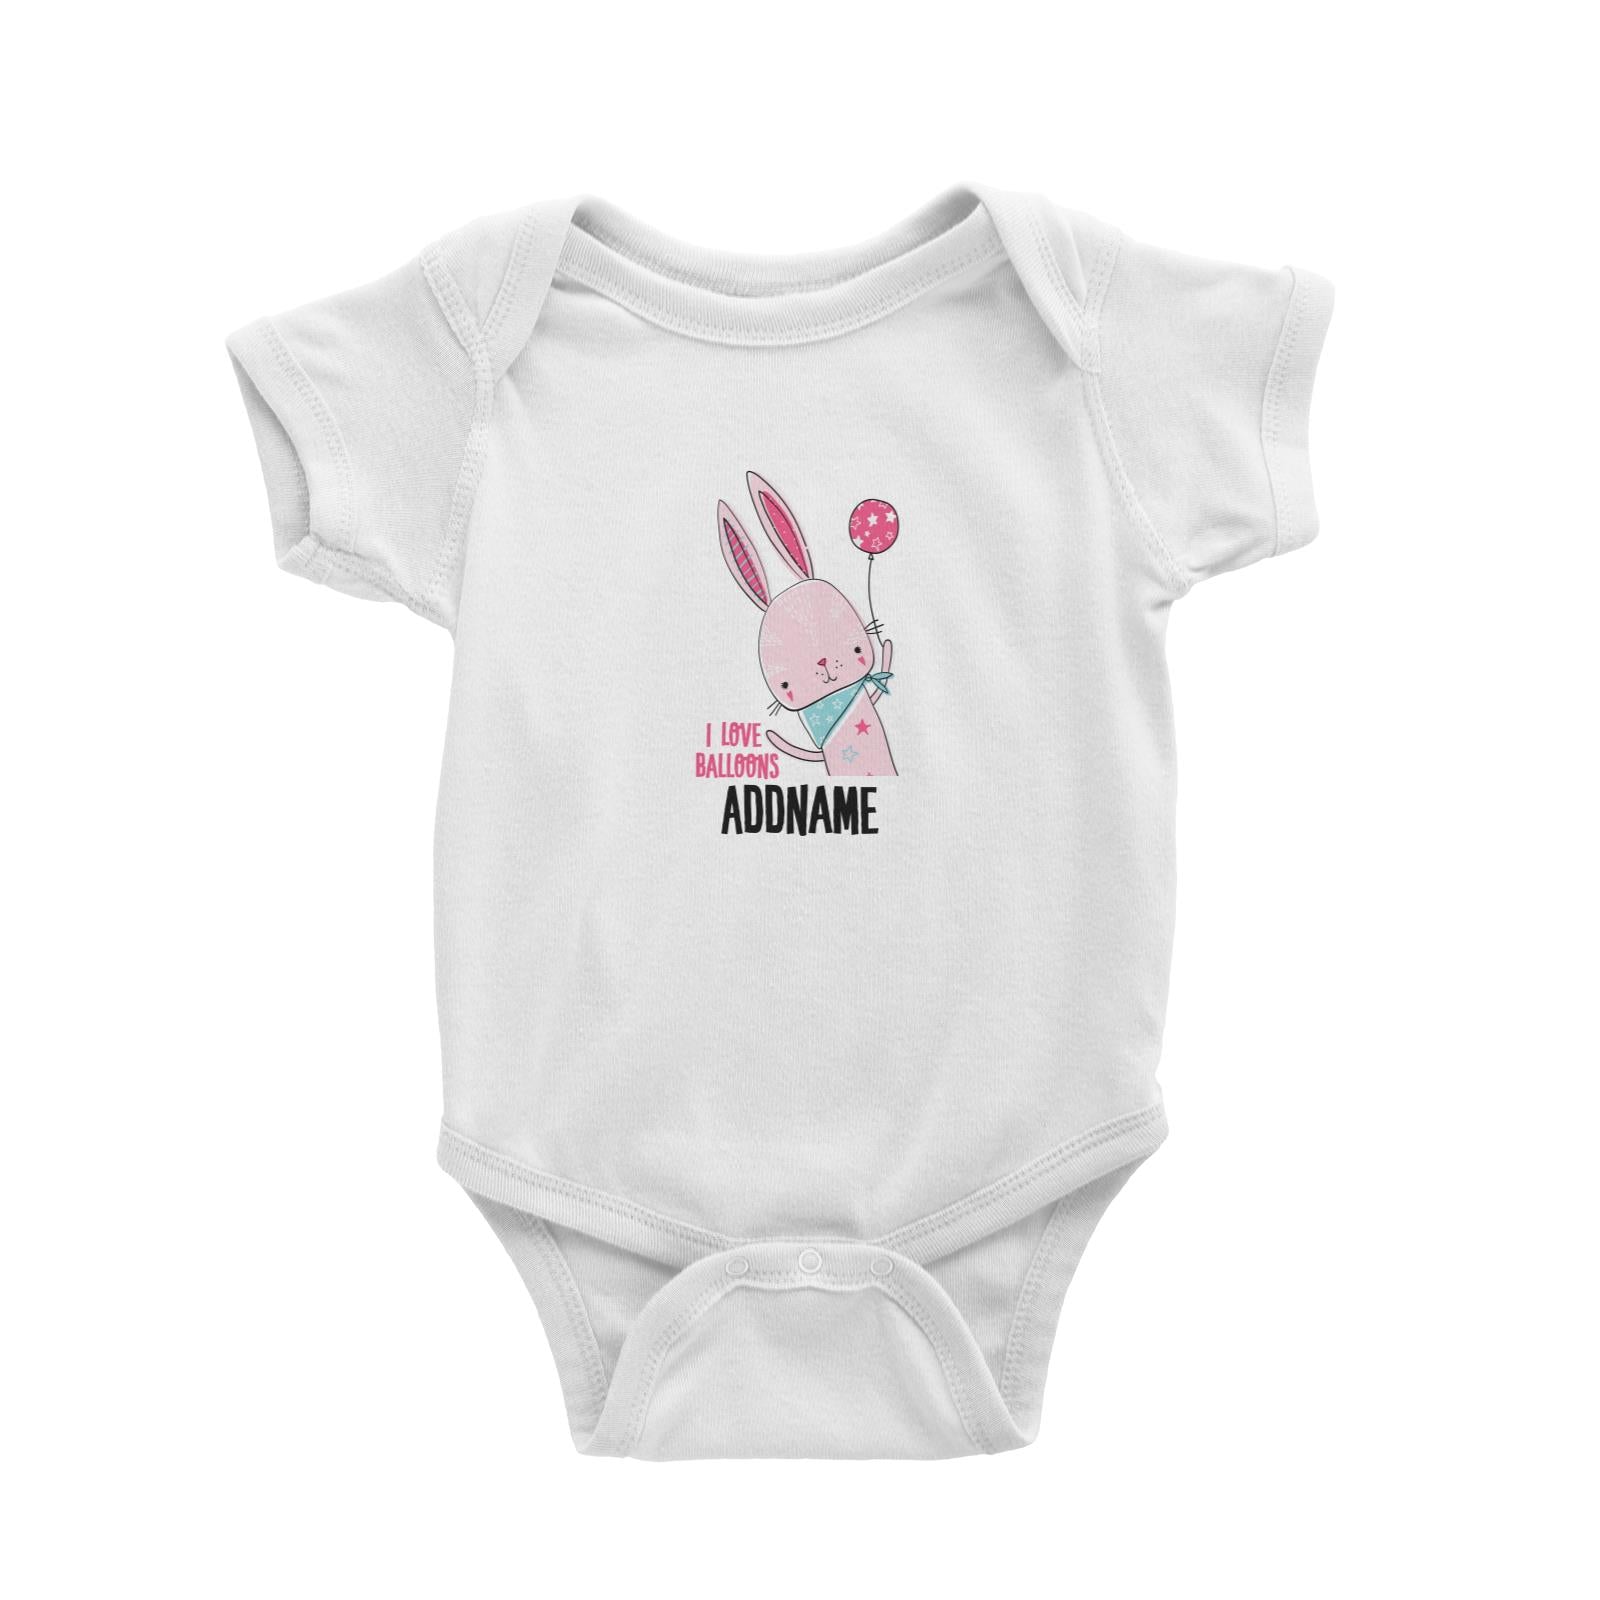 Cool Vibrant Series I Love Balloons Addname Baby Romper